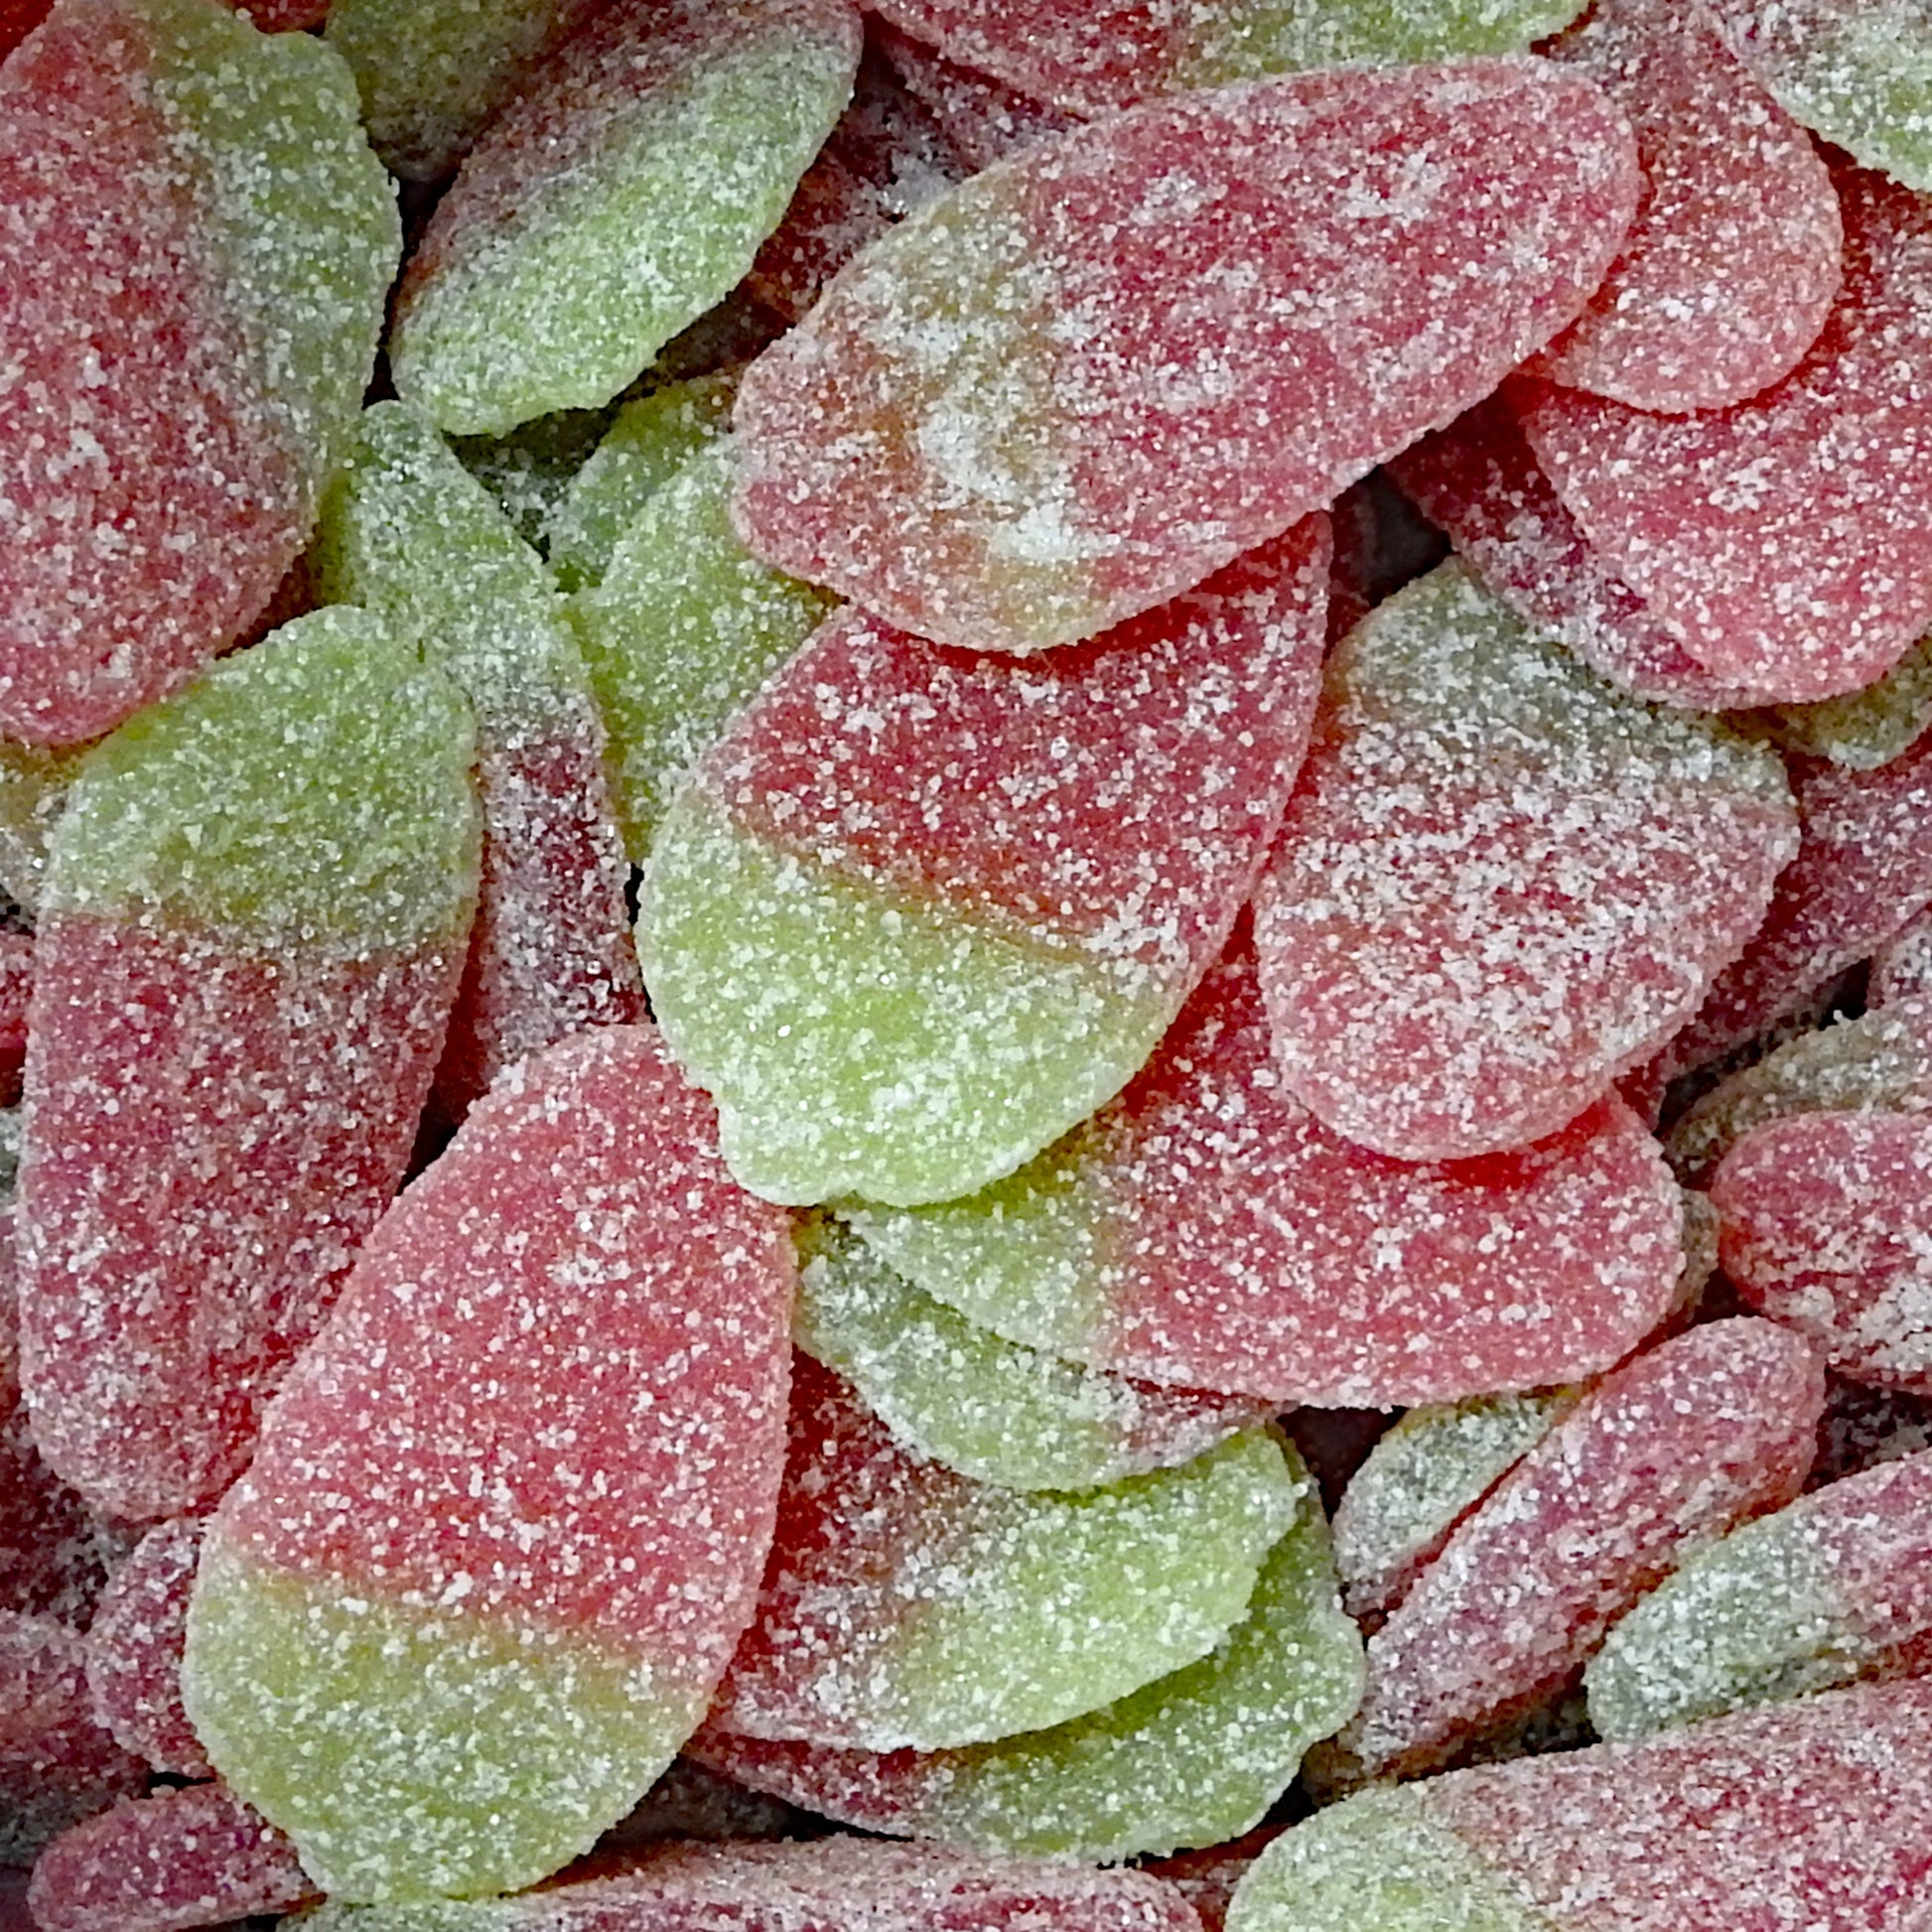 Fizzy Strawberries - Retro Sweets at The Sweetie Jar